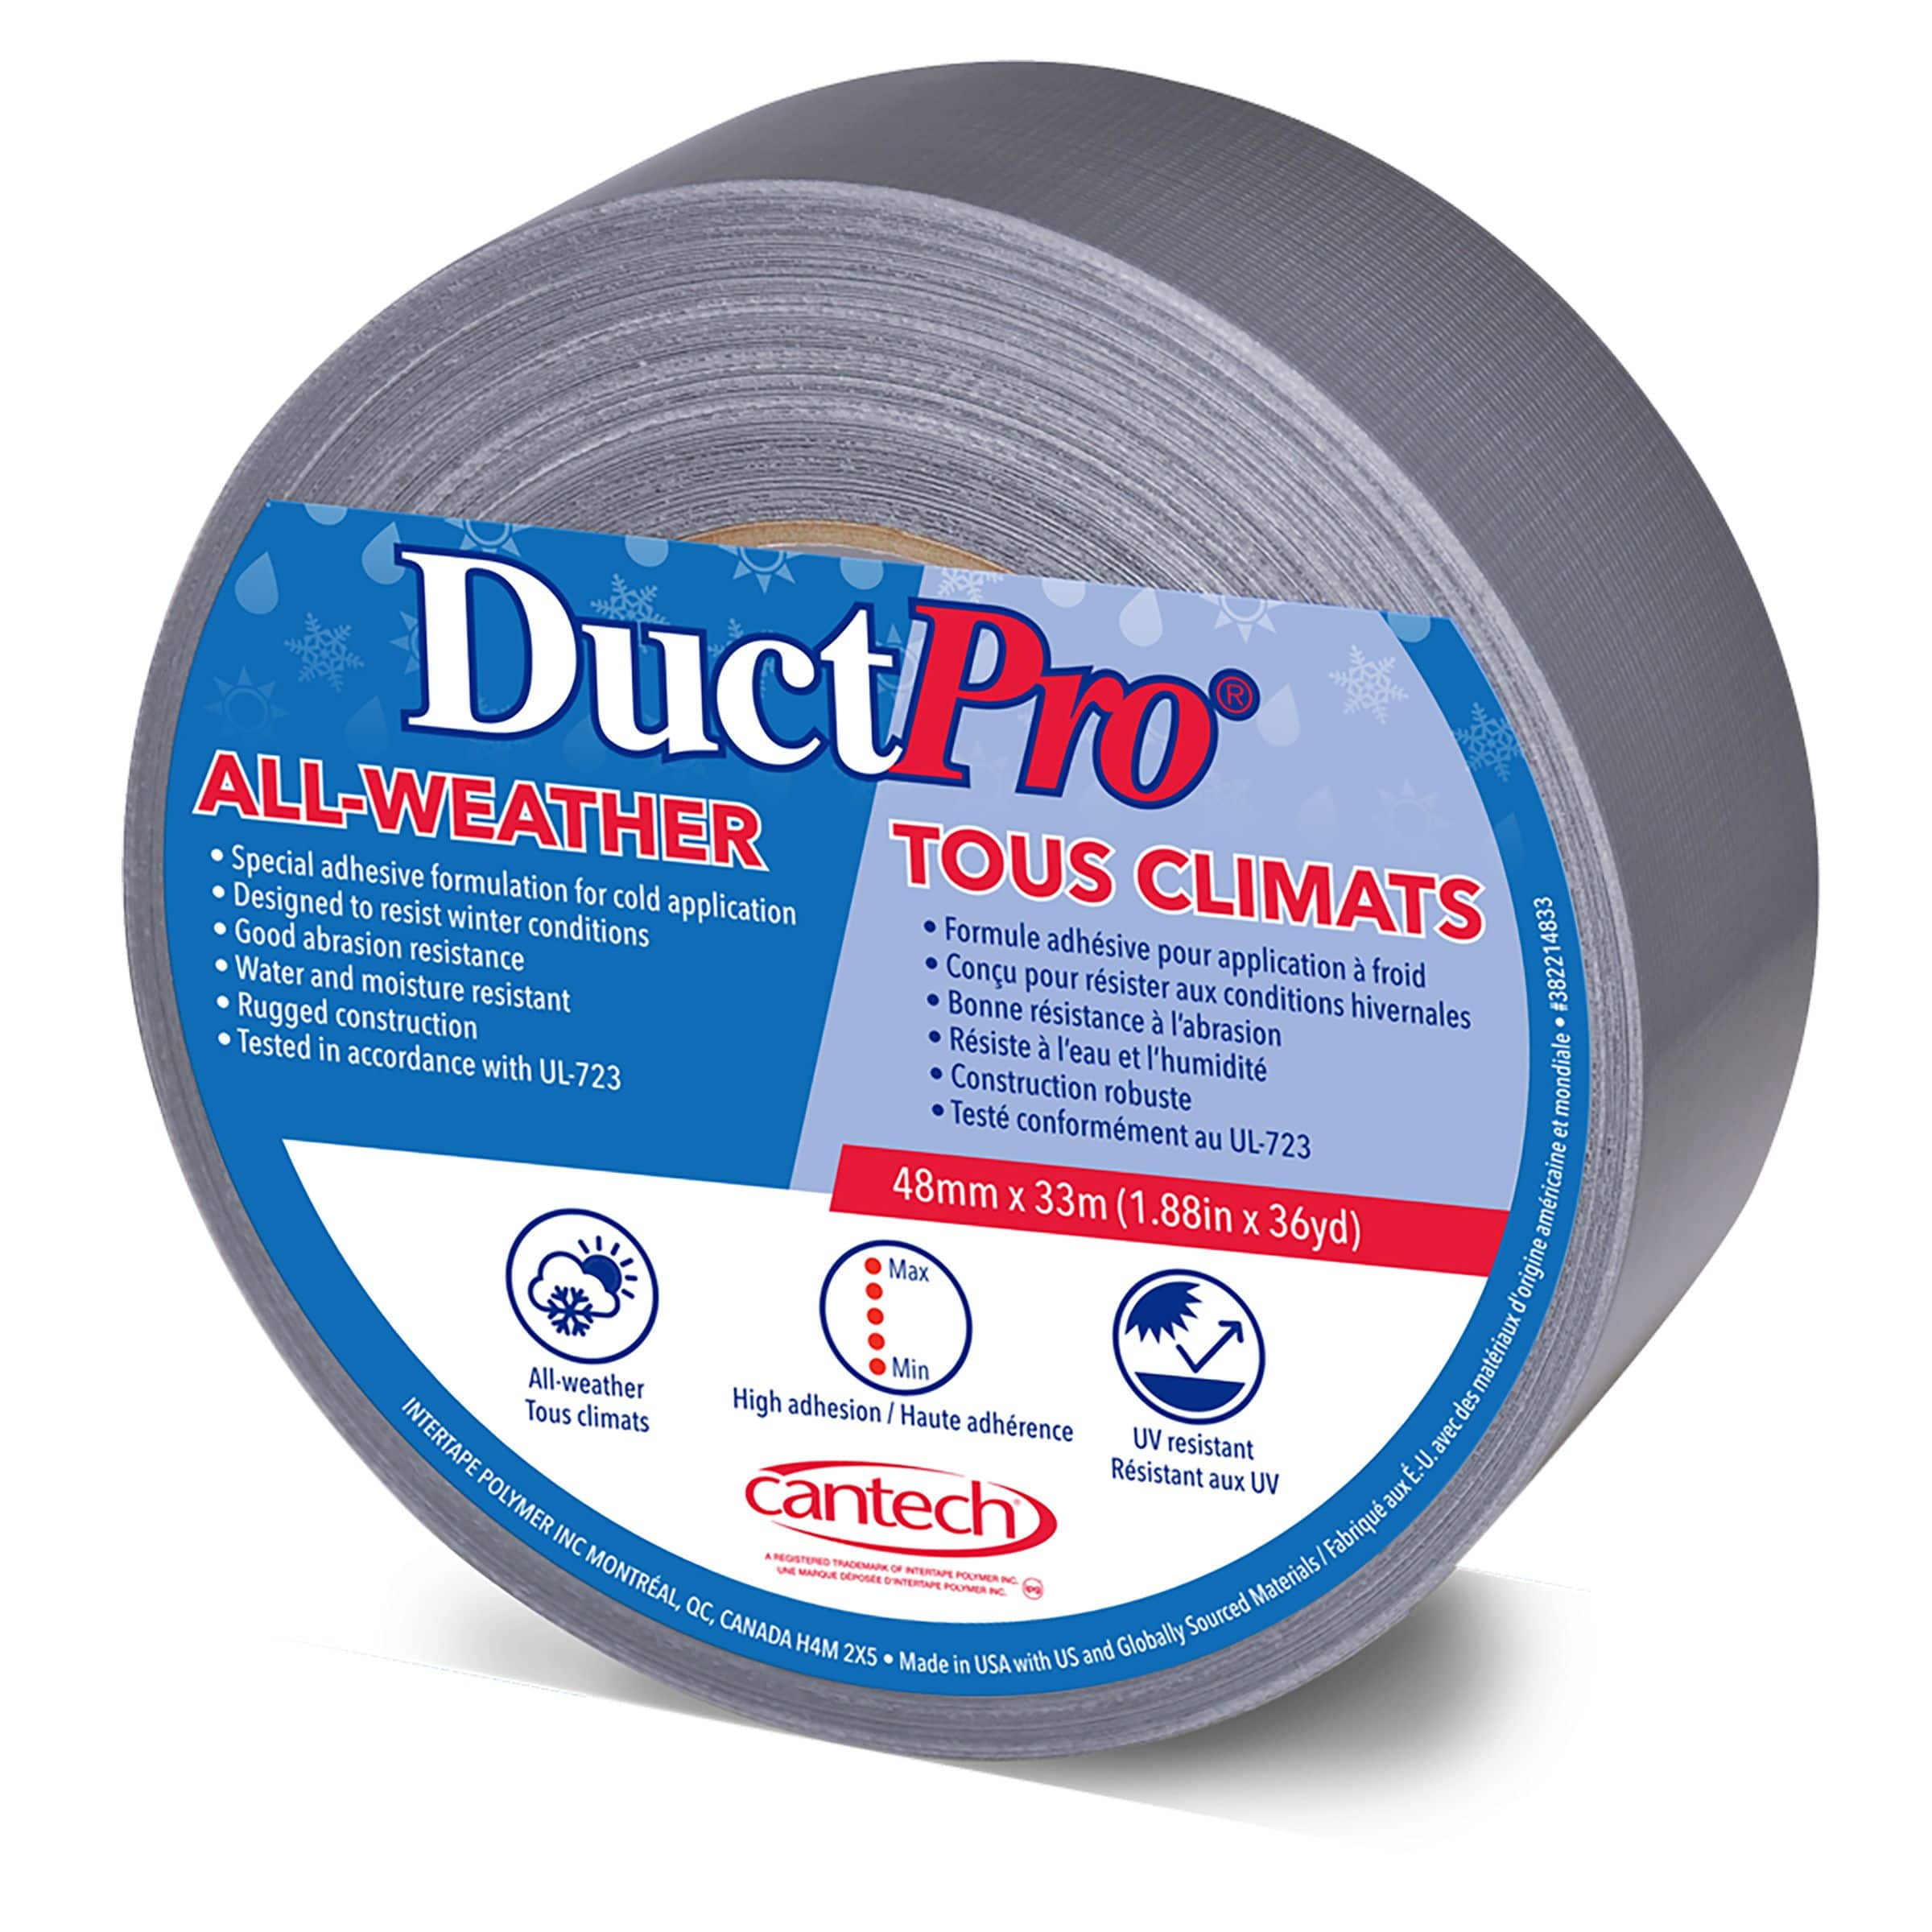 Can Tech Cold Weather Duct Tape, Moisture & Water-Resistant, Sticks at 5°C,  48-mm x 33-m